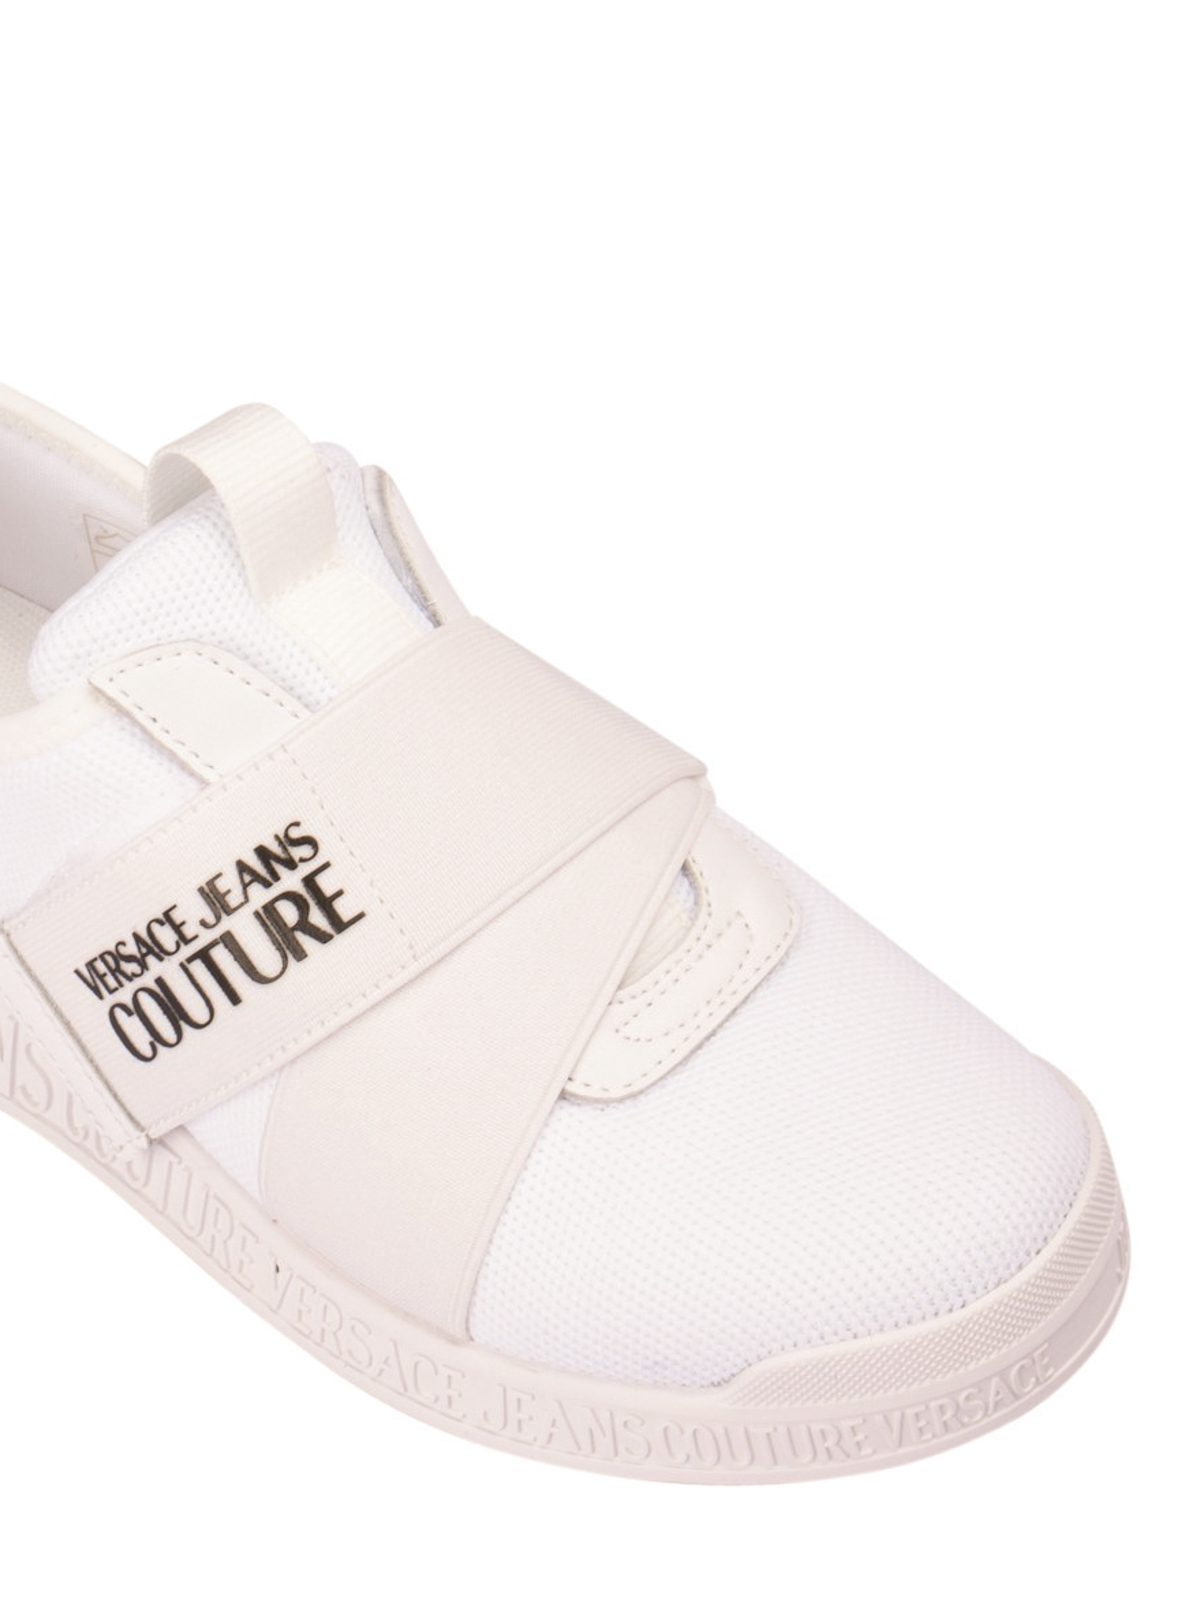 Versace Jeans Couture - Branded velcro strap slip-ons - trainers ...